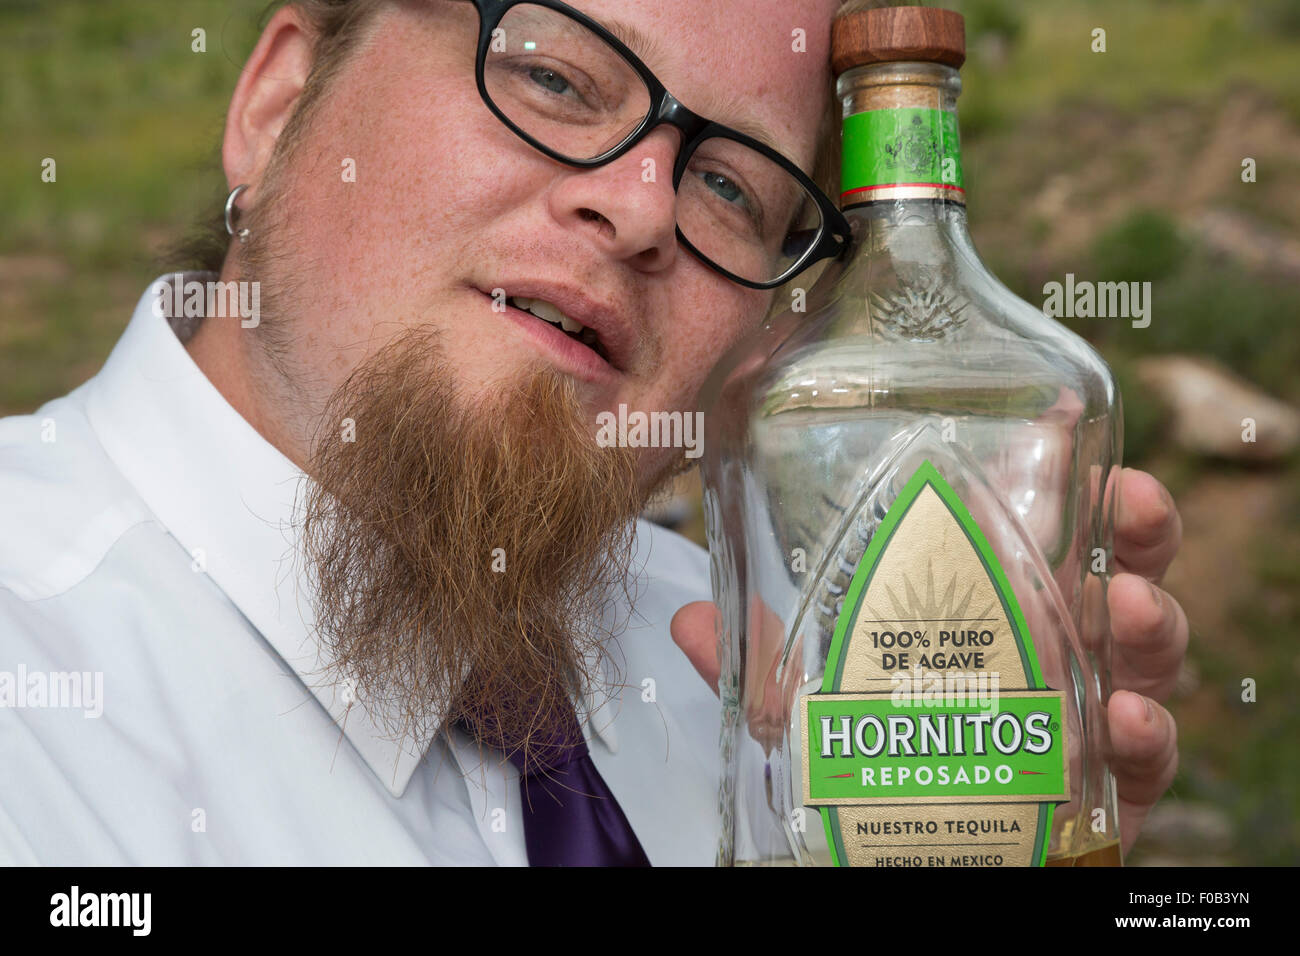 Dillon, Colorado - A man holds a tequila bottle during a wedding celebration. Stock Photo